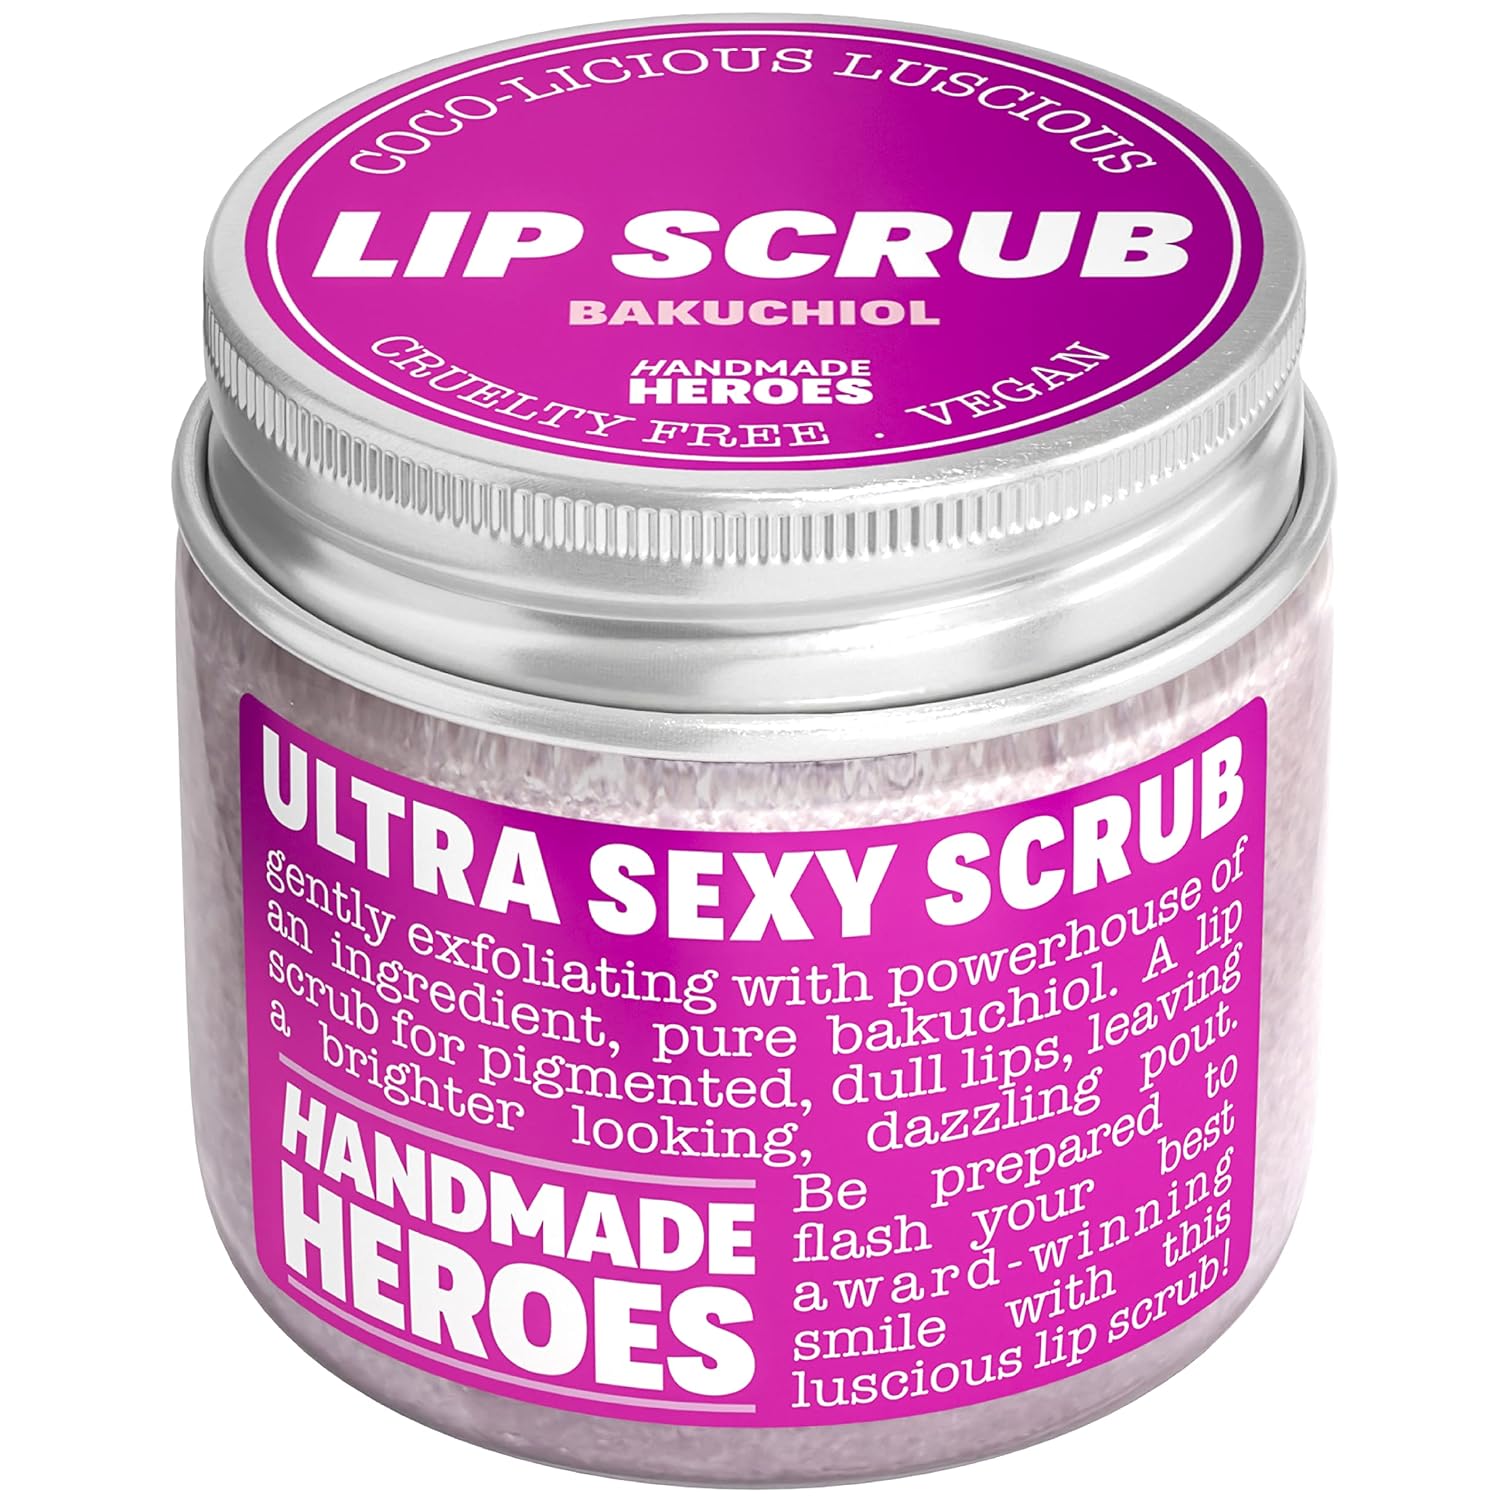 Handmade Heroes Bakuchiol Lip Scrub 1 fl oz | Deep Conditioning Lip Plumper Helps Reduce Fine Lines and Wrinkles Appearance | 100% Cruelty Free Vegan | Lip Care for Luscious Lips